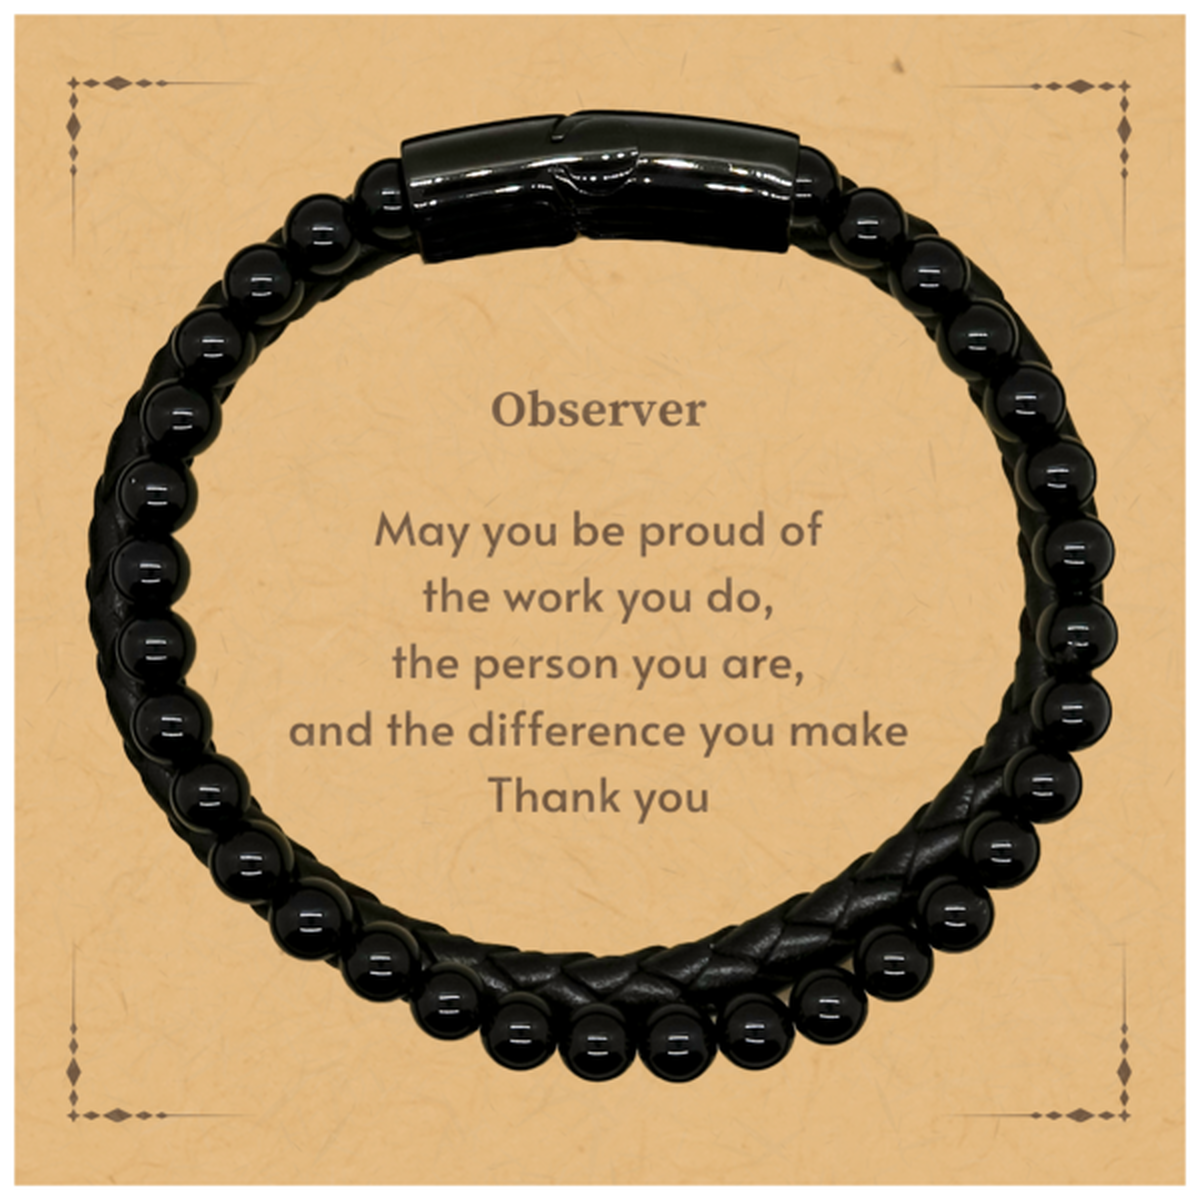 Heartwarming Stone Leather Bracelets Retirement Coworkers Gifts for Observer, Observer May You be proud of the work you do, the person you are Gifts for Boss Men Women Friends